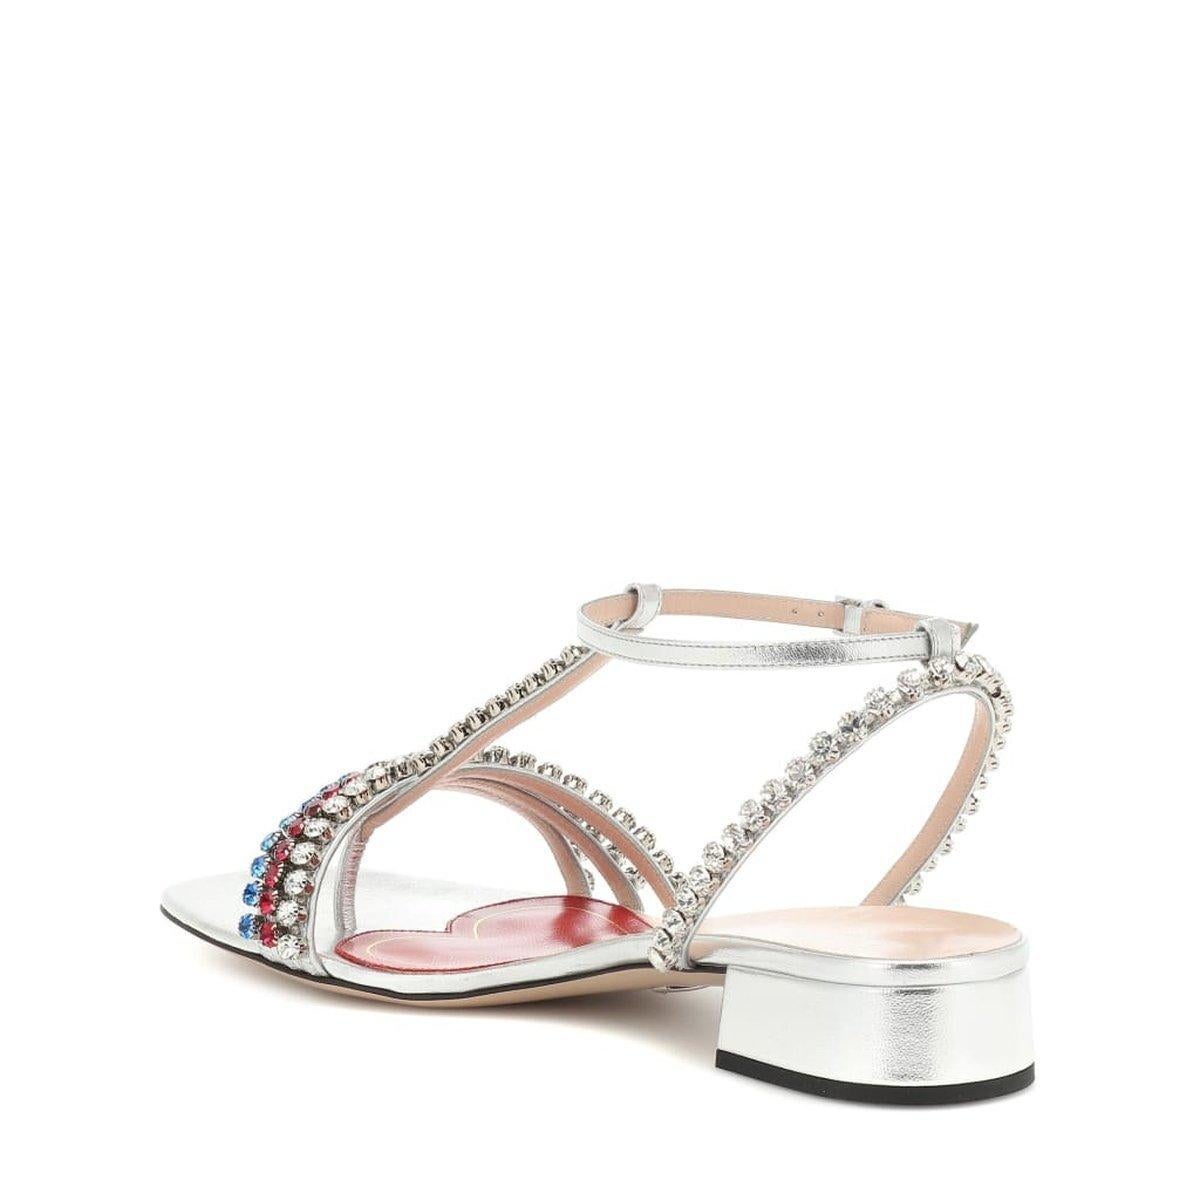 Gucci Bertie Embellished Metallic Leather Sandals IT 39.5 For Sale 1